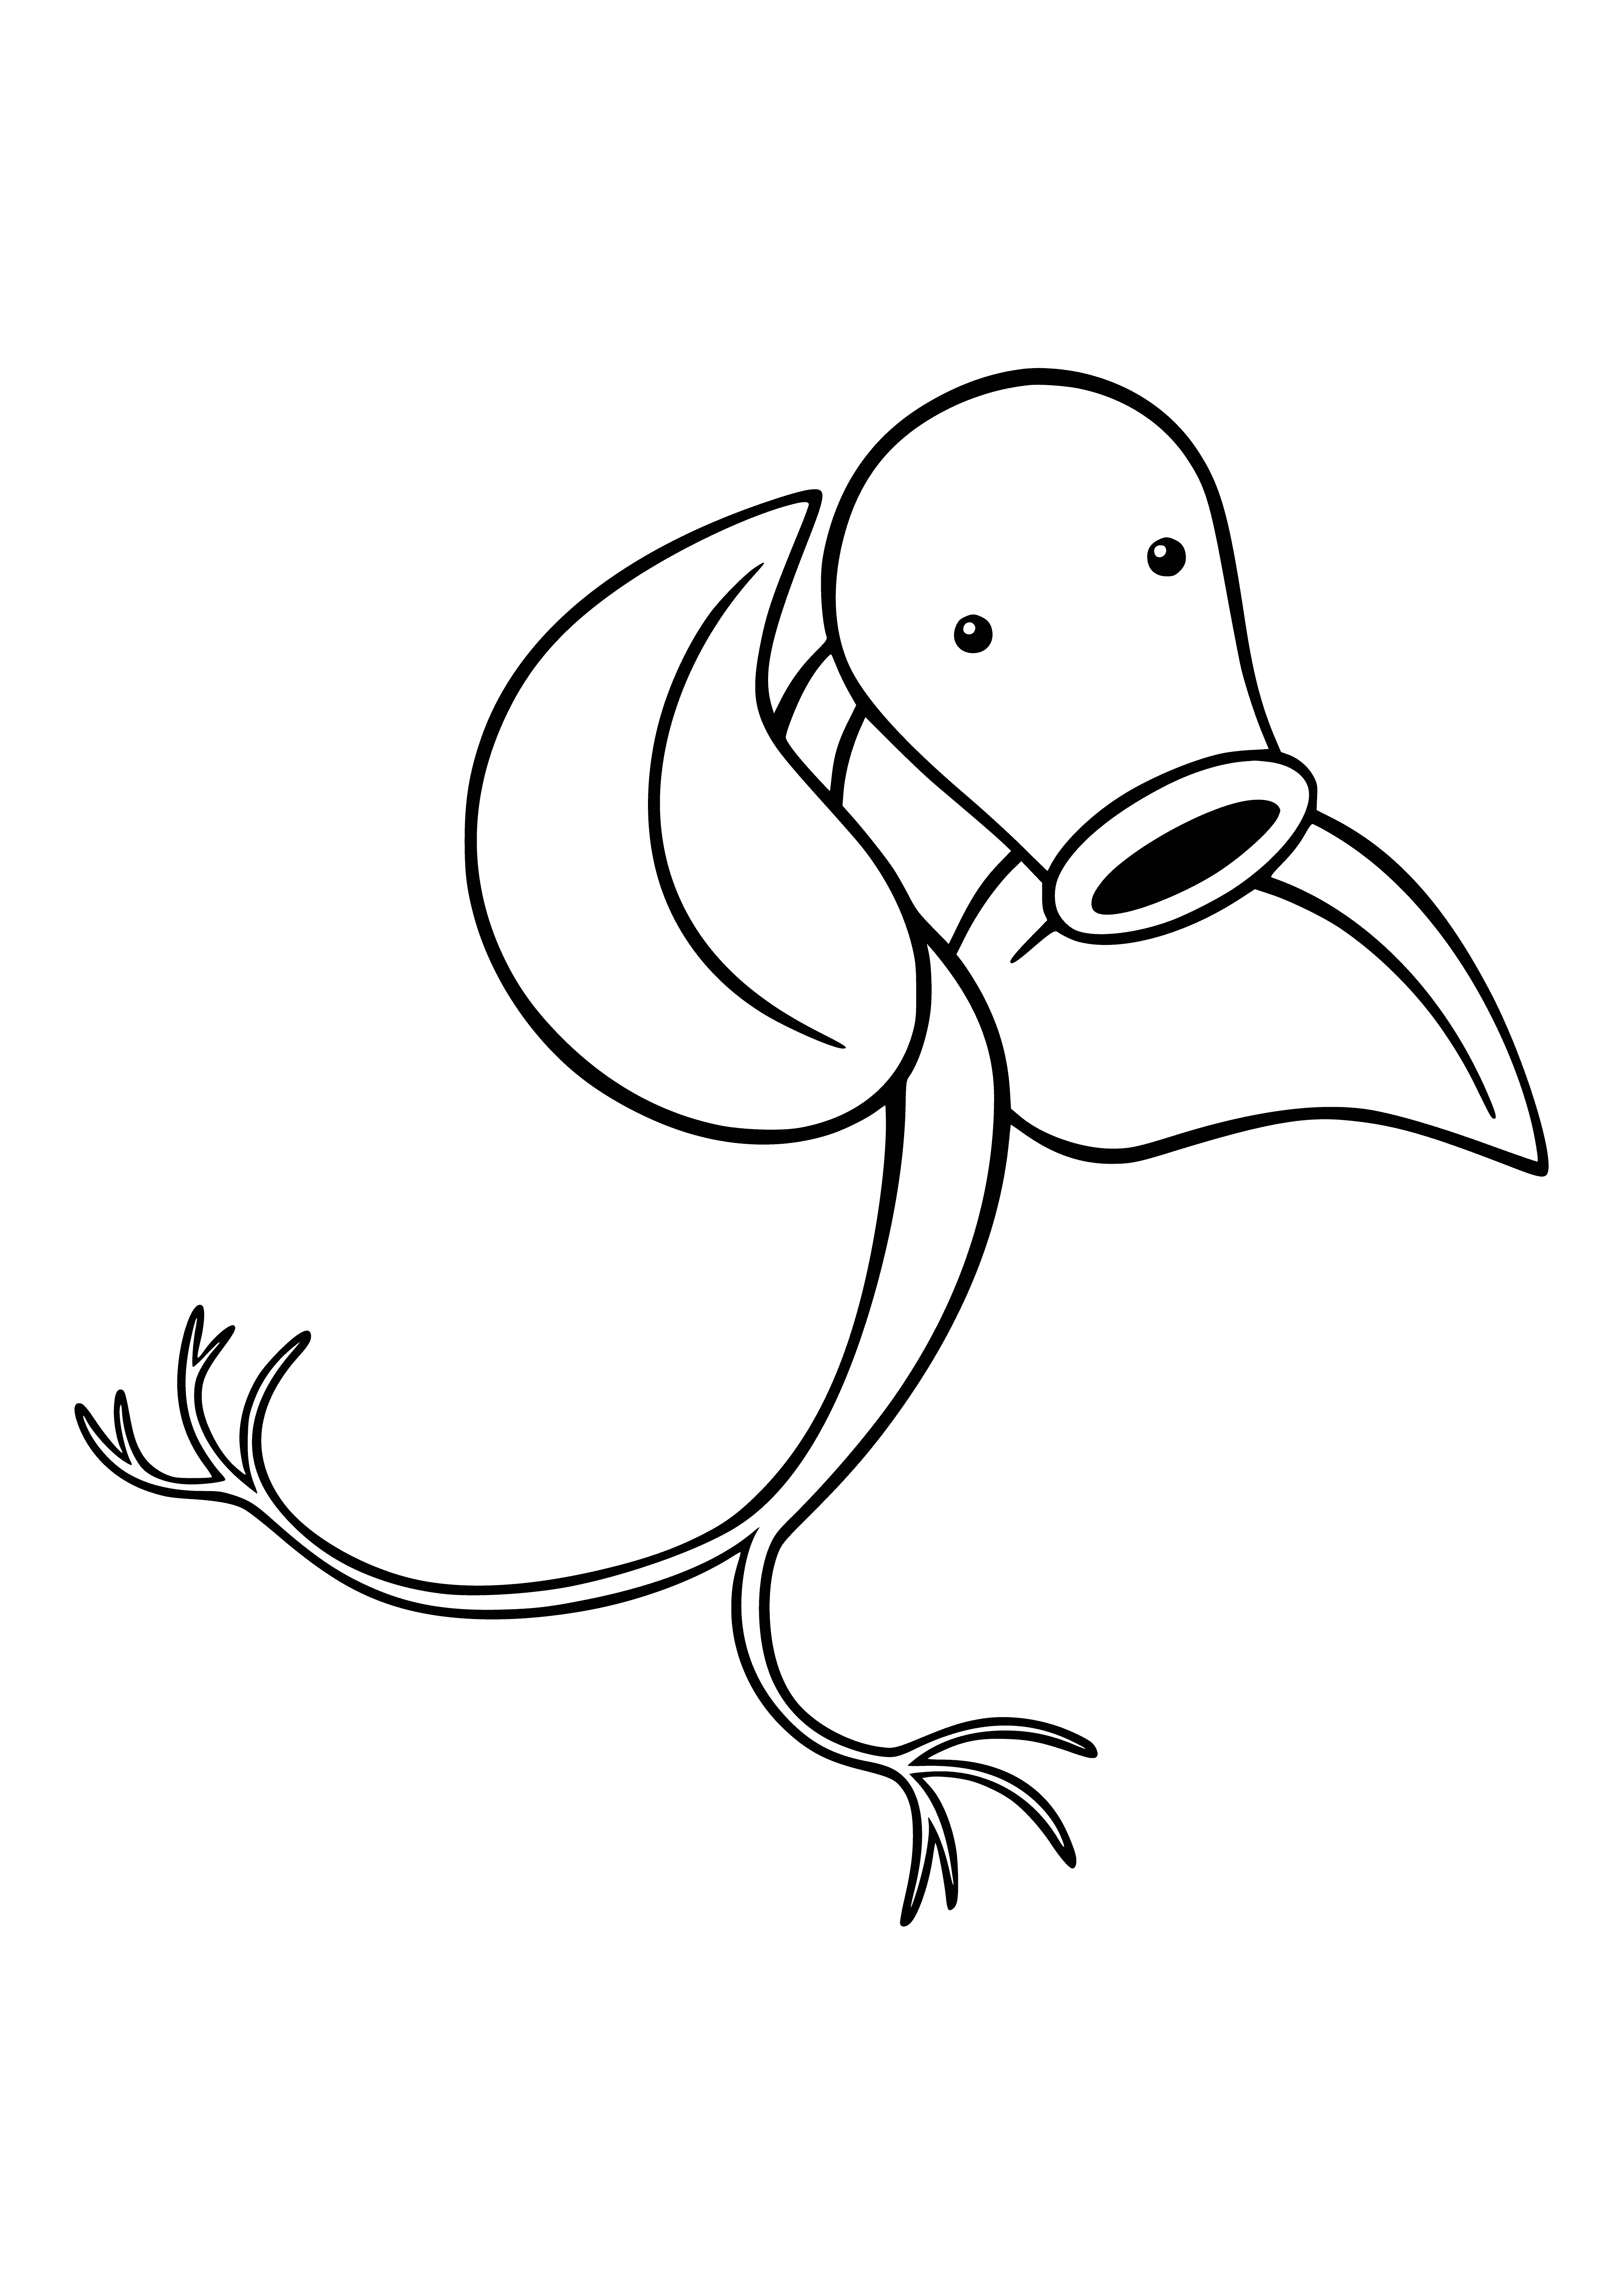 coloring page: Plant-like Pokémon Bellsprout has bell-shaped head, red eyes, two small leaves and yellow body with green ring around neck.